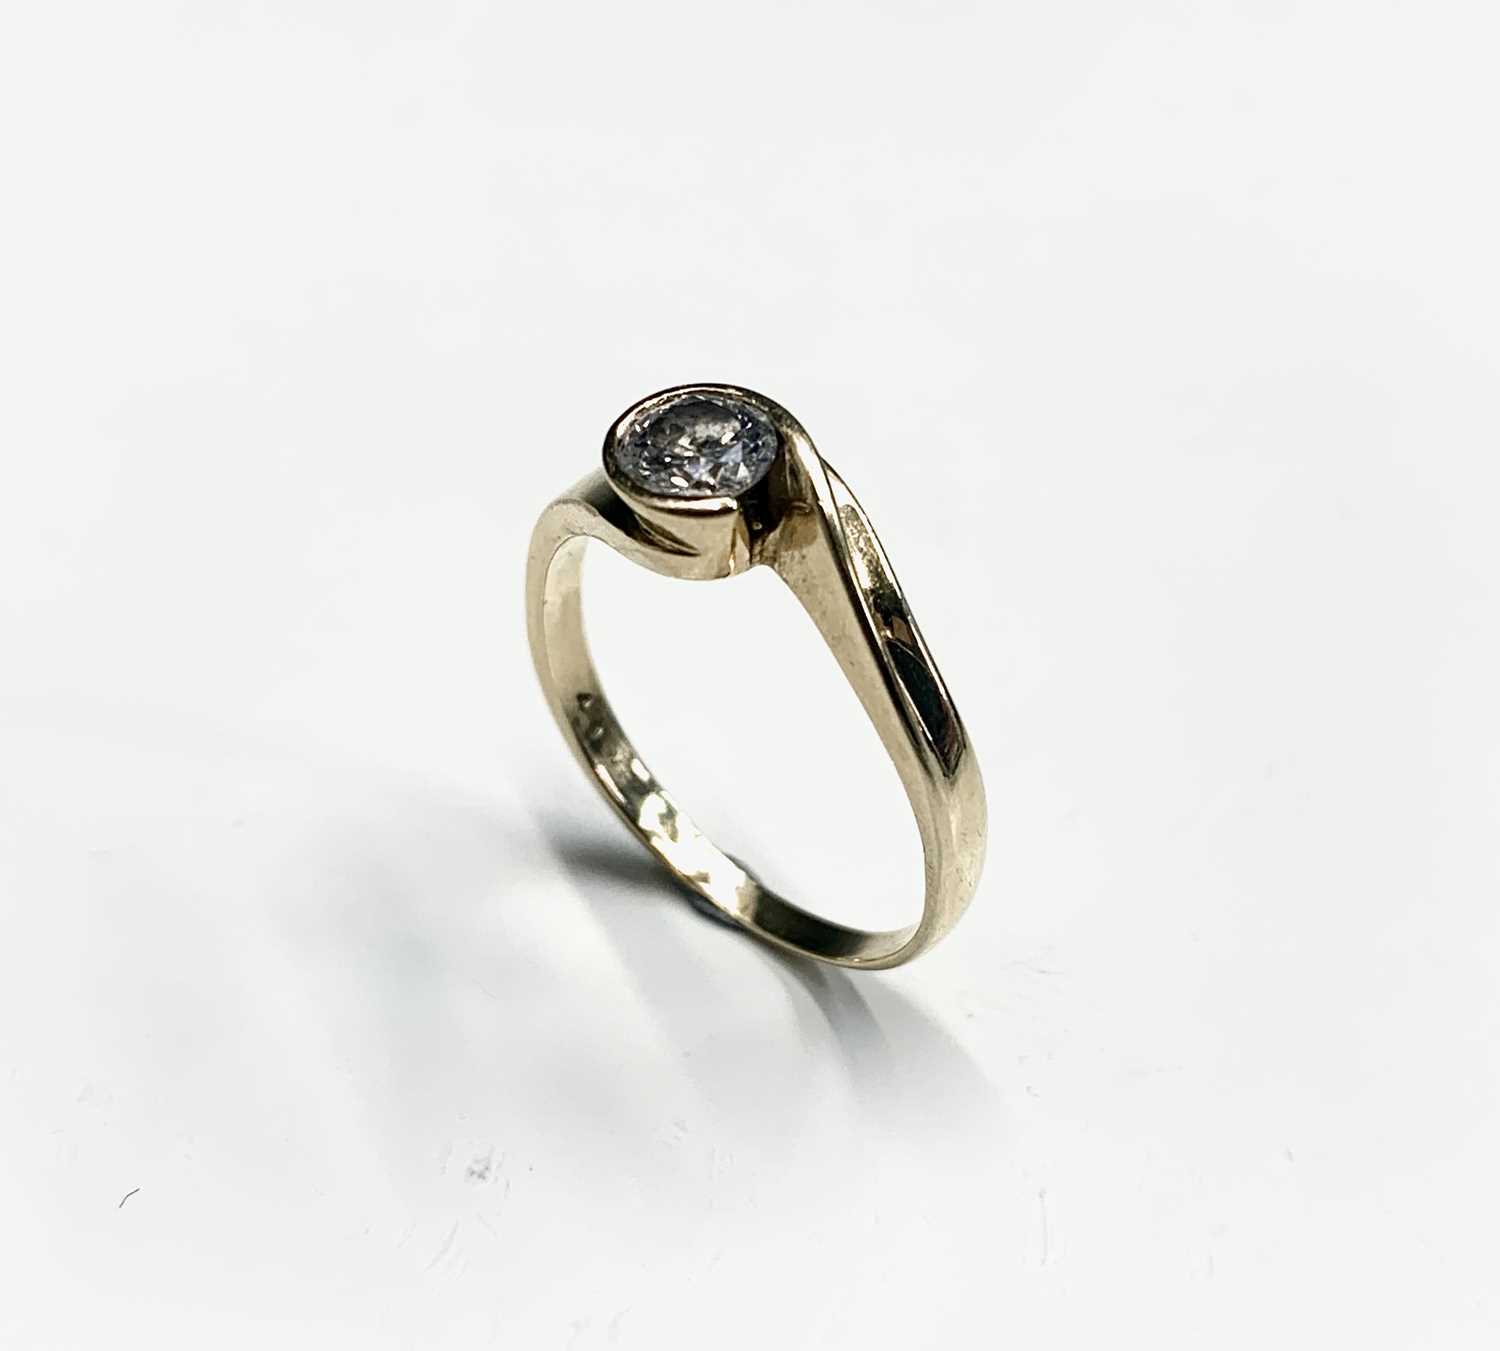 An 18ct gold diamond solitaire contemporary ring, the stone of approximately 0.4cts - Image 3 of 3